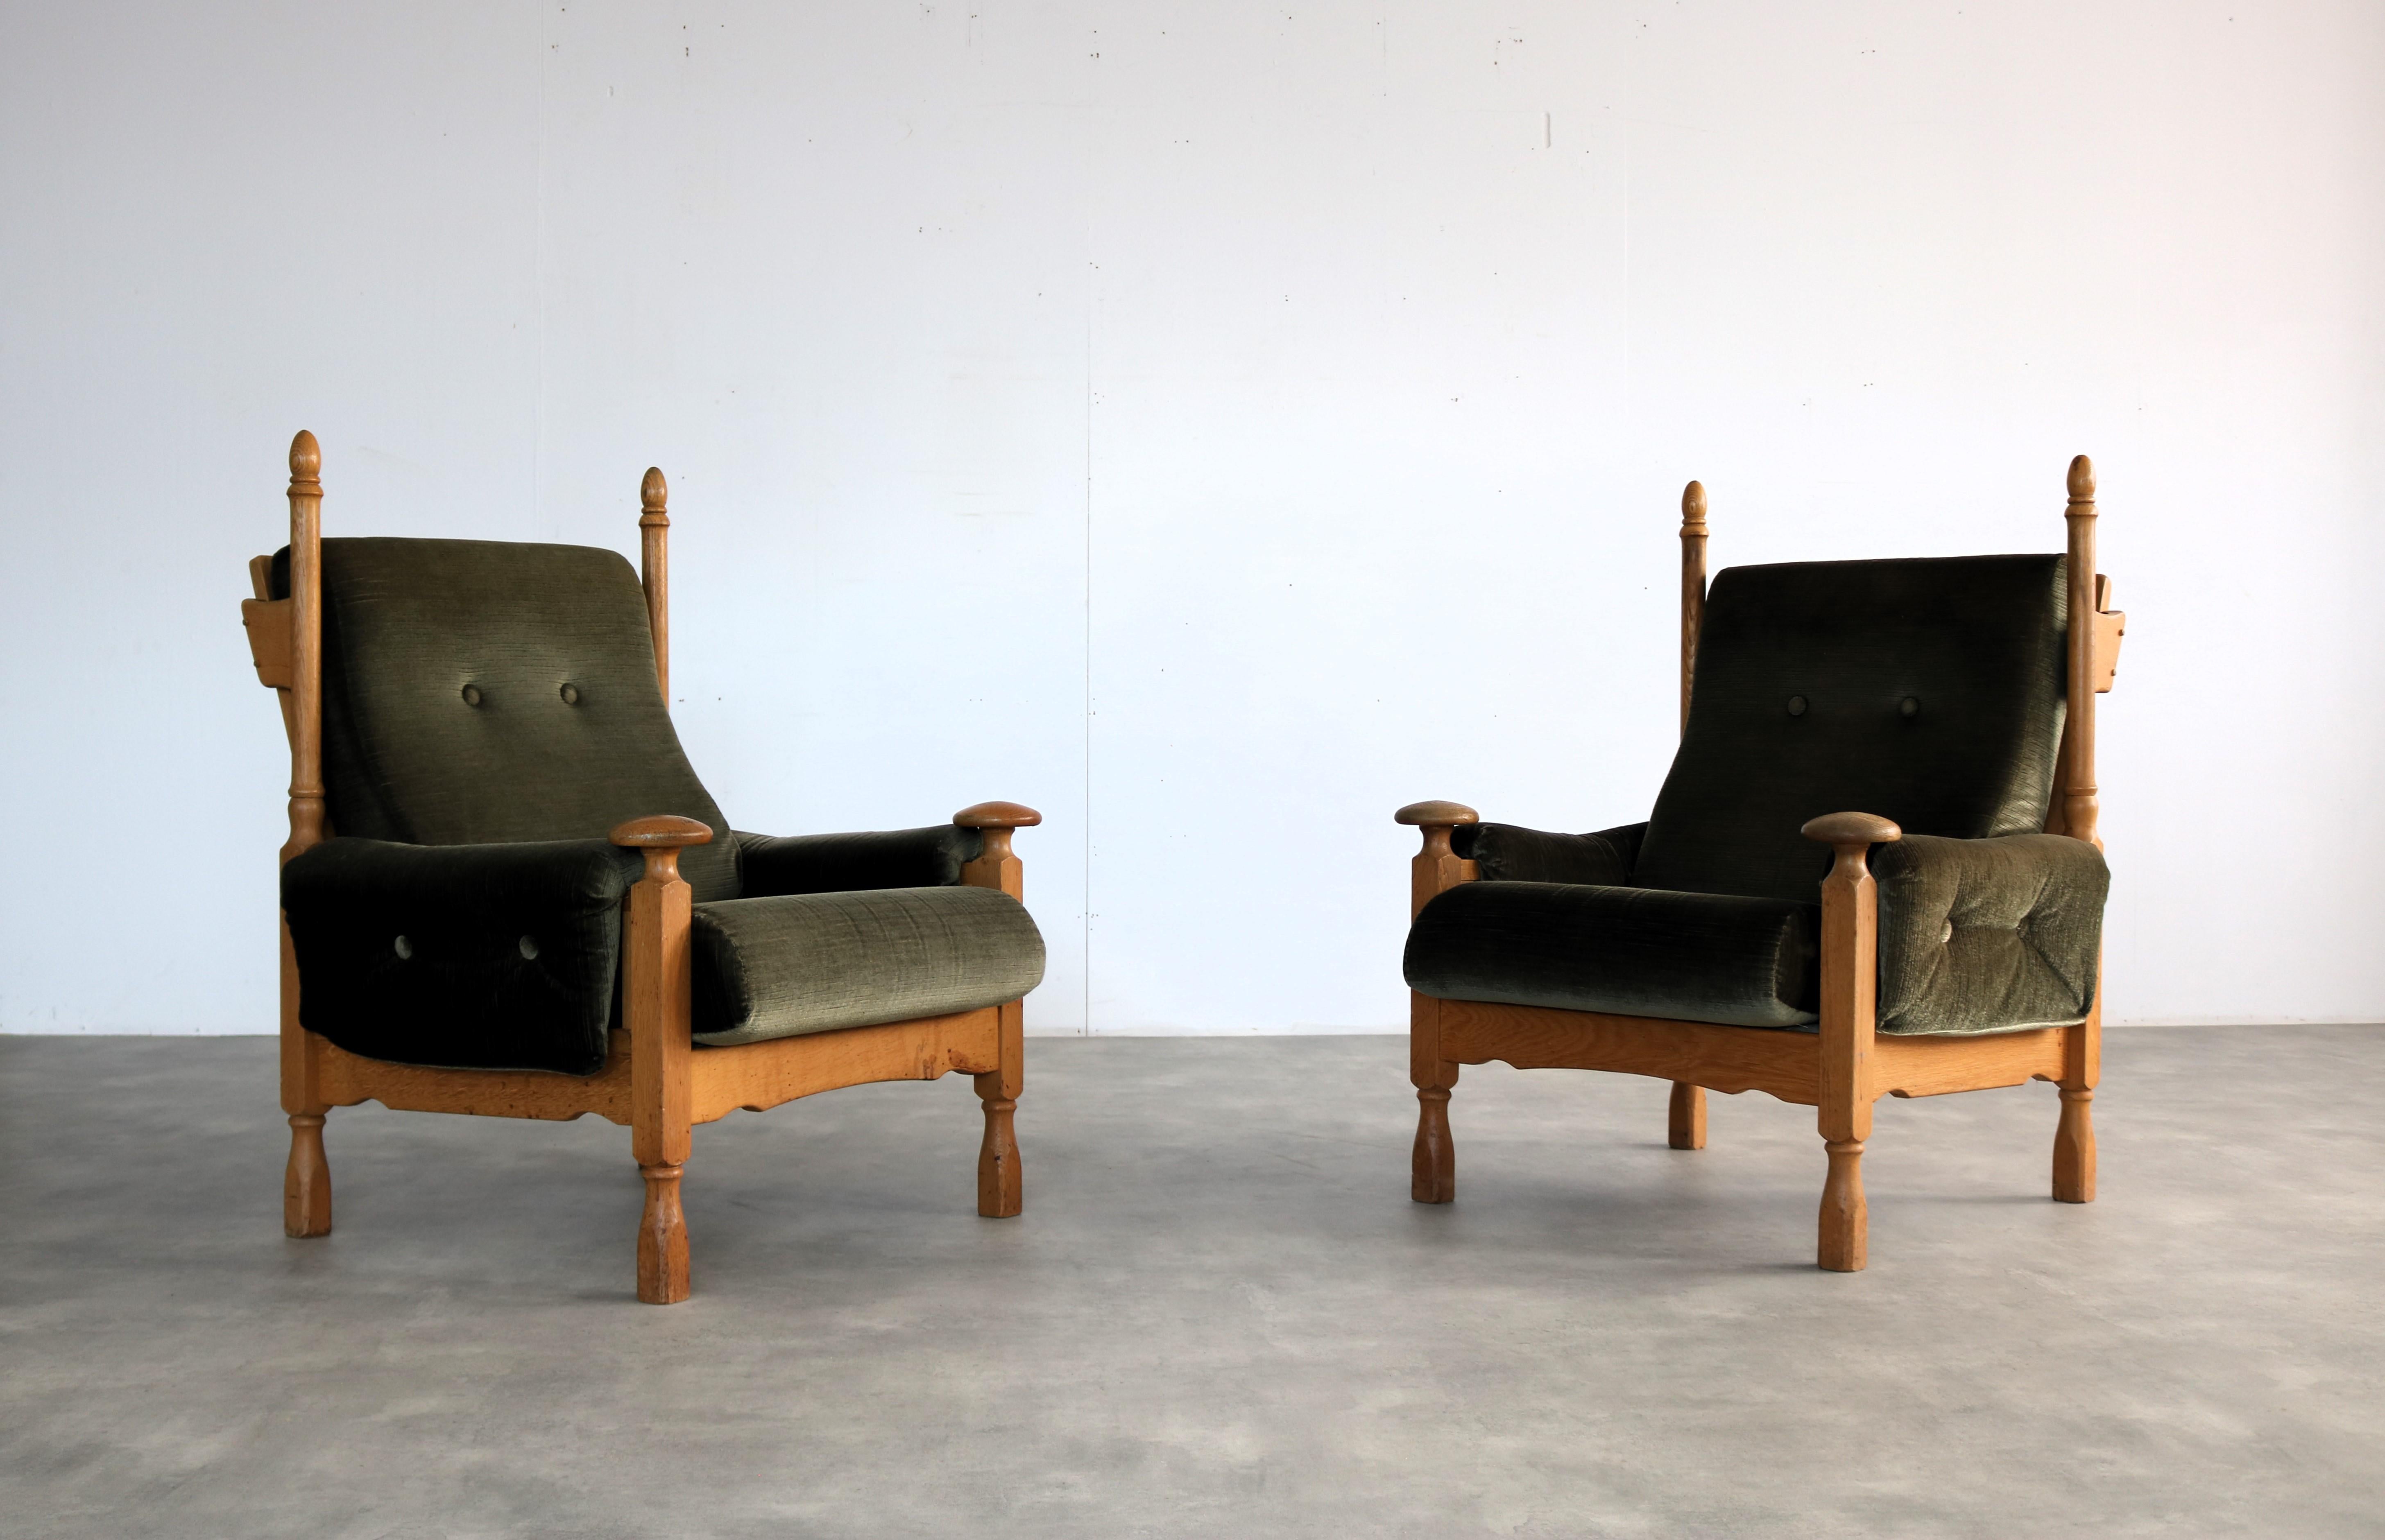 vintage armchairs | brutalist | 1950s easy chairs

period | 1950s
design | unknown
condition | good | light signs of use
size | 110 x 82 x 86 (hxwxd)

details | oak; textile; 2 available; price is per piece;

article number | 2220